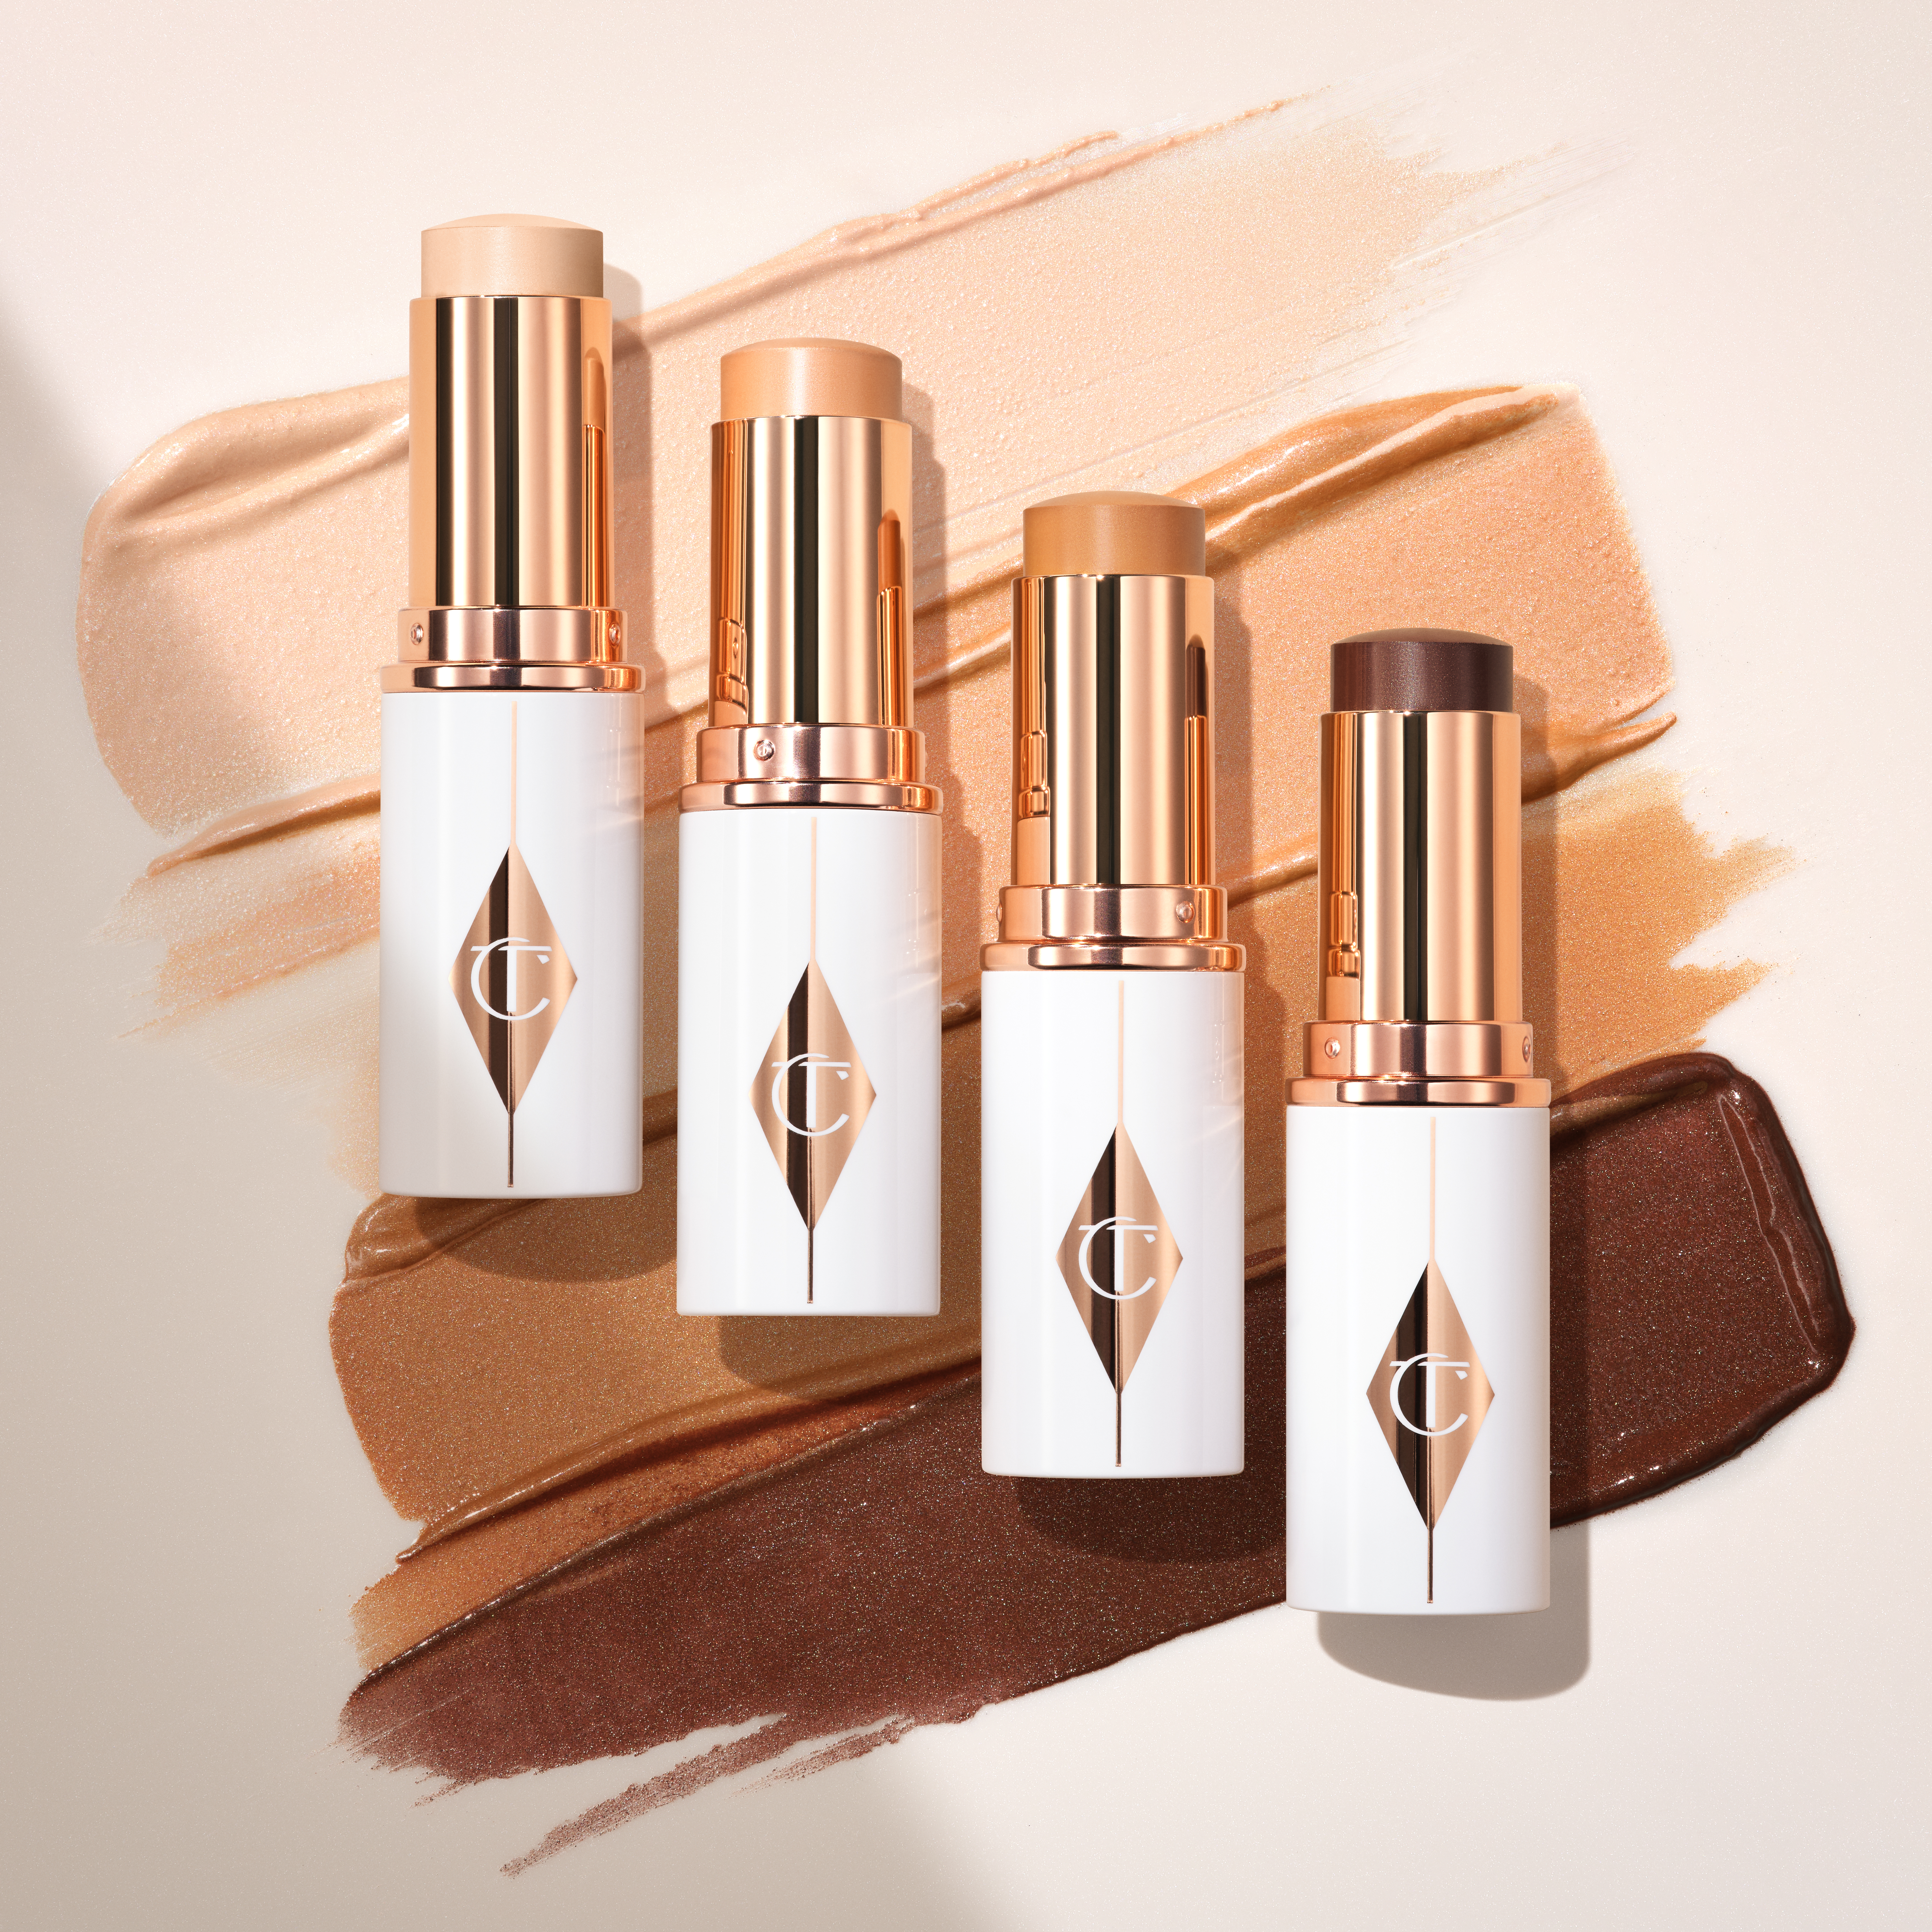 4 shades of Unreal Skin Sheer Glow Tint stick foundation helping you choose foundation shade online